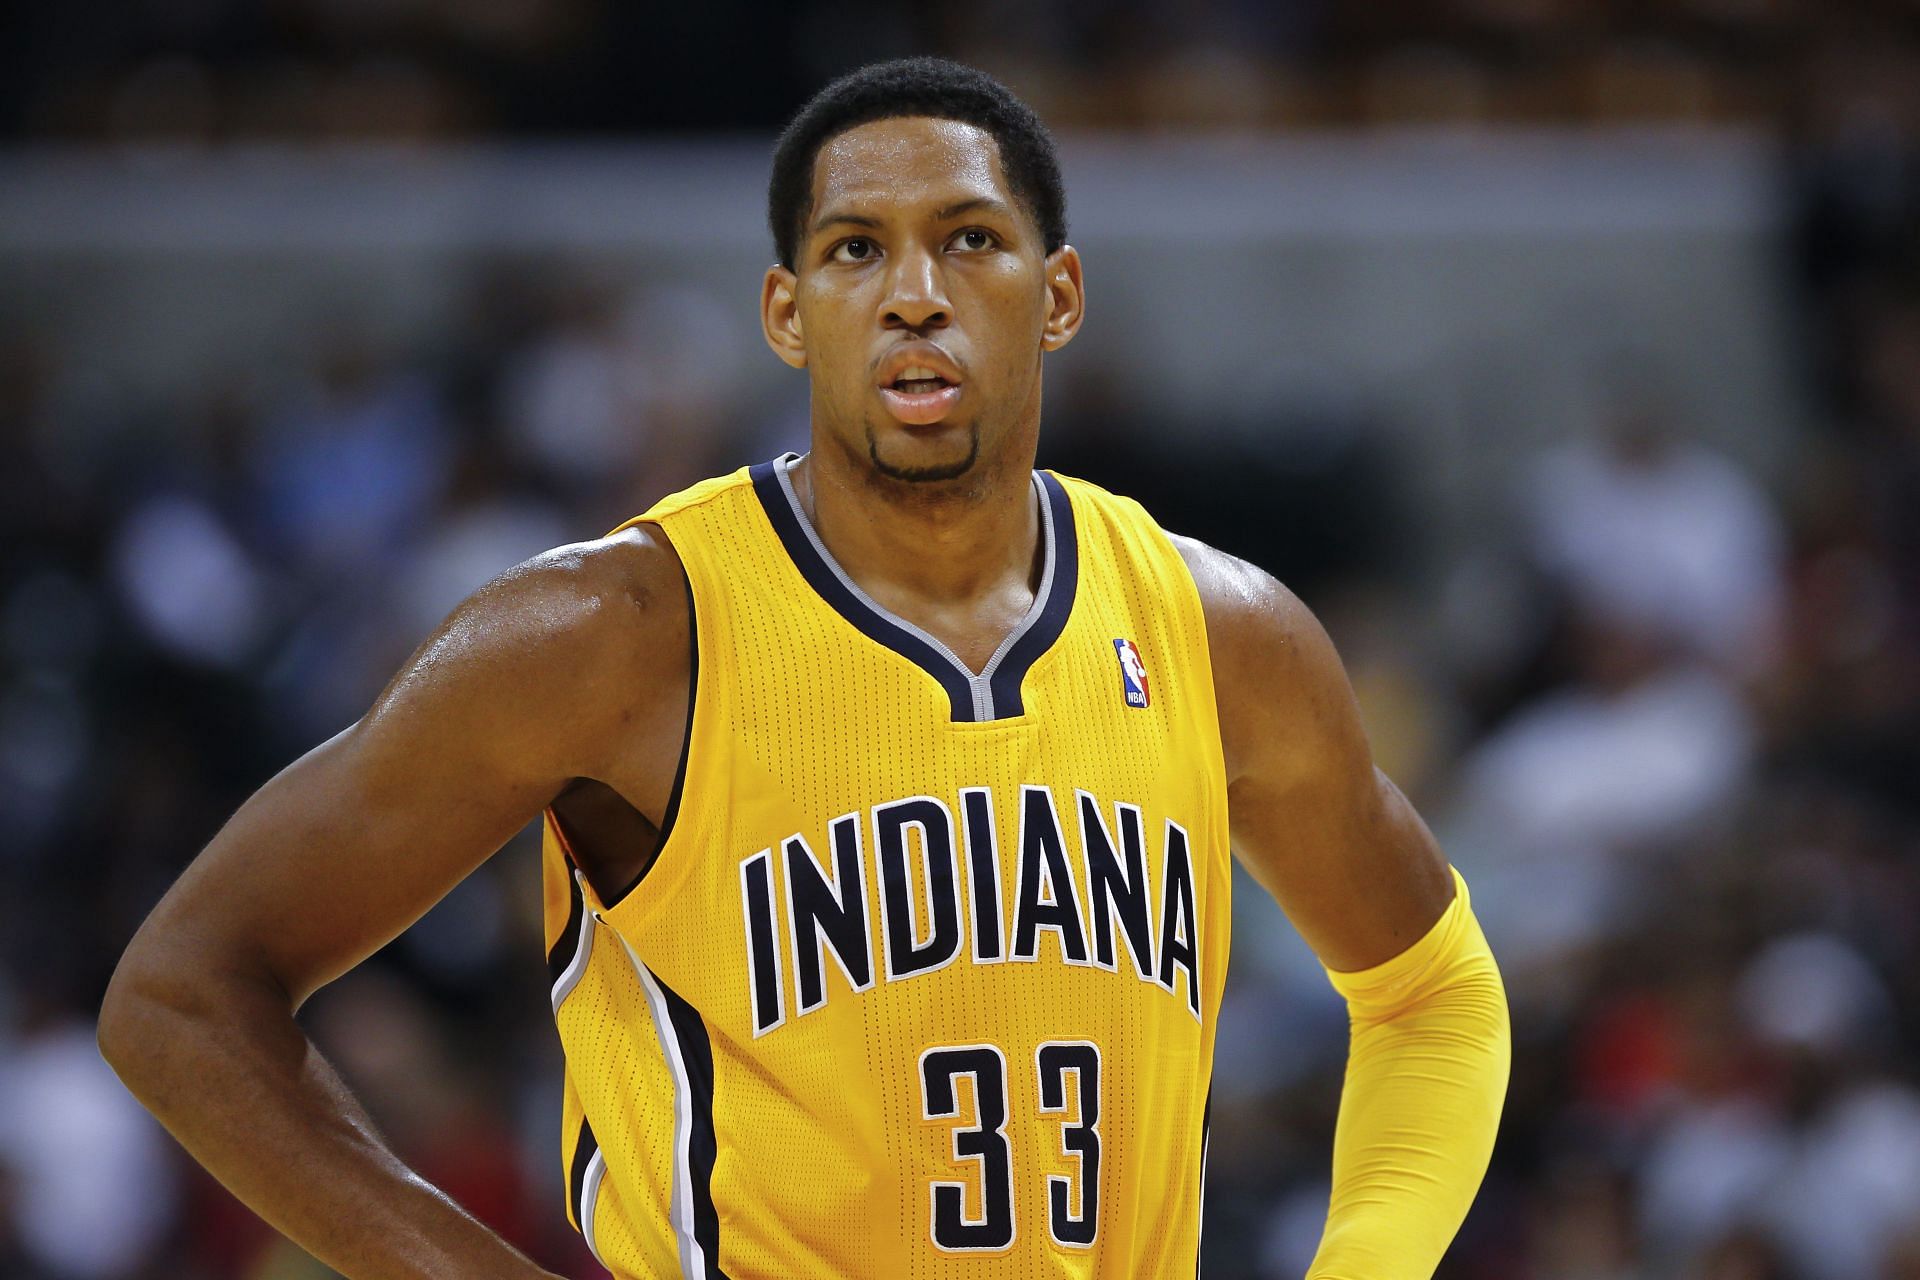 Is Brittany Schmitt's Story About Danny Granger's Cousin Keith a